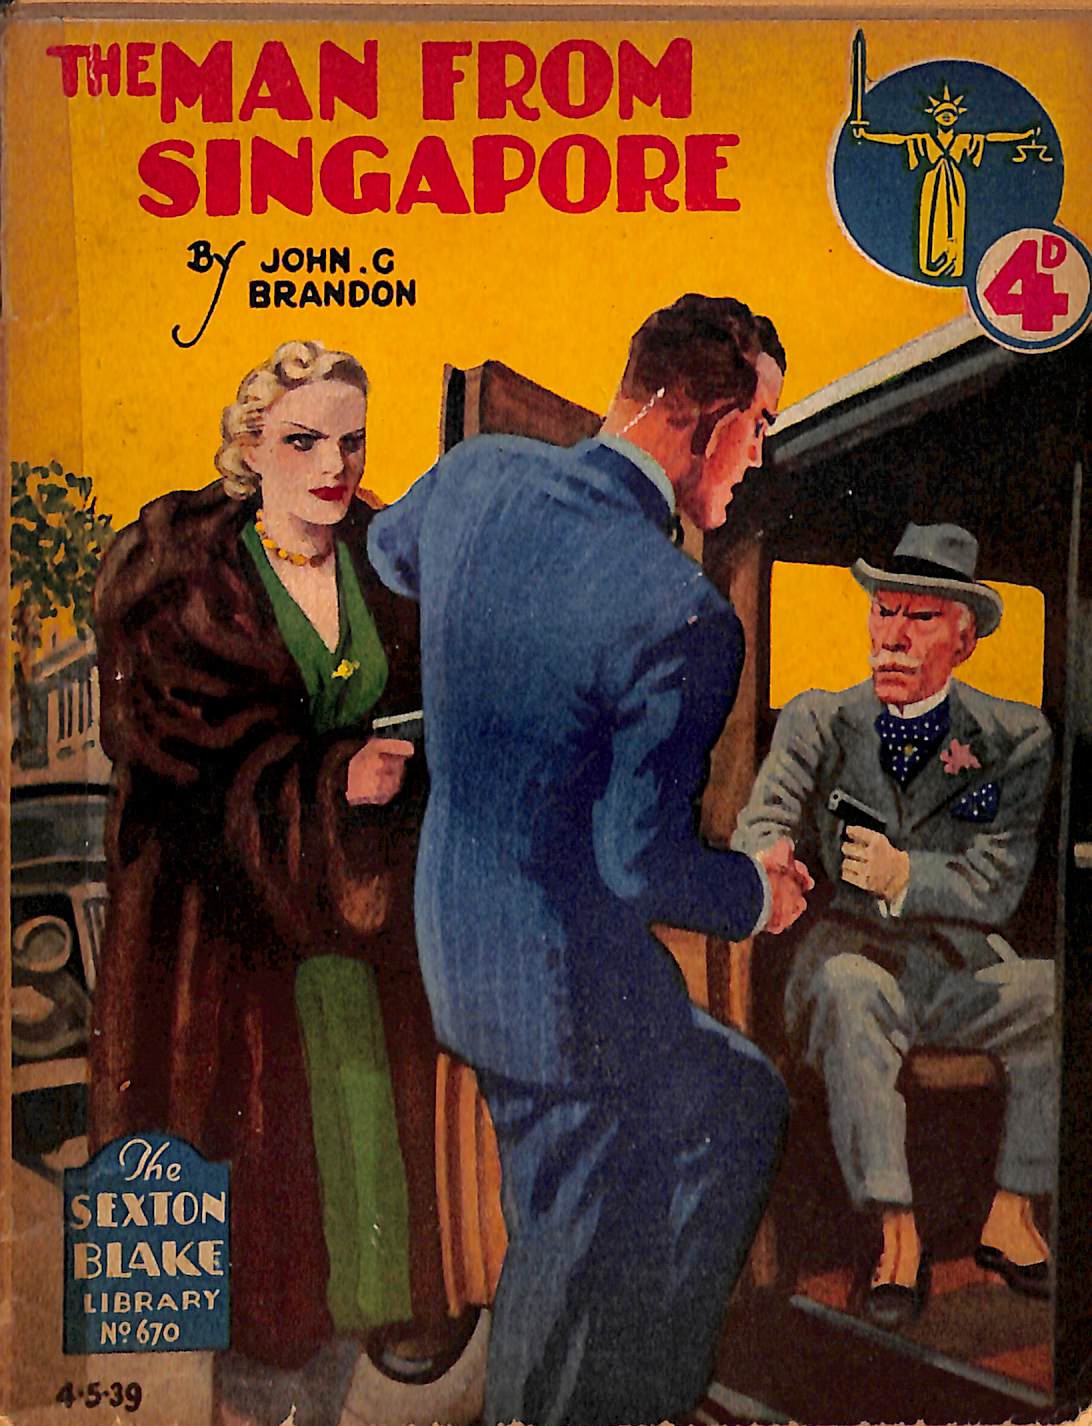 Comic Book Cover For Sexton Blake Library S2 670 - The Man from Singapore